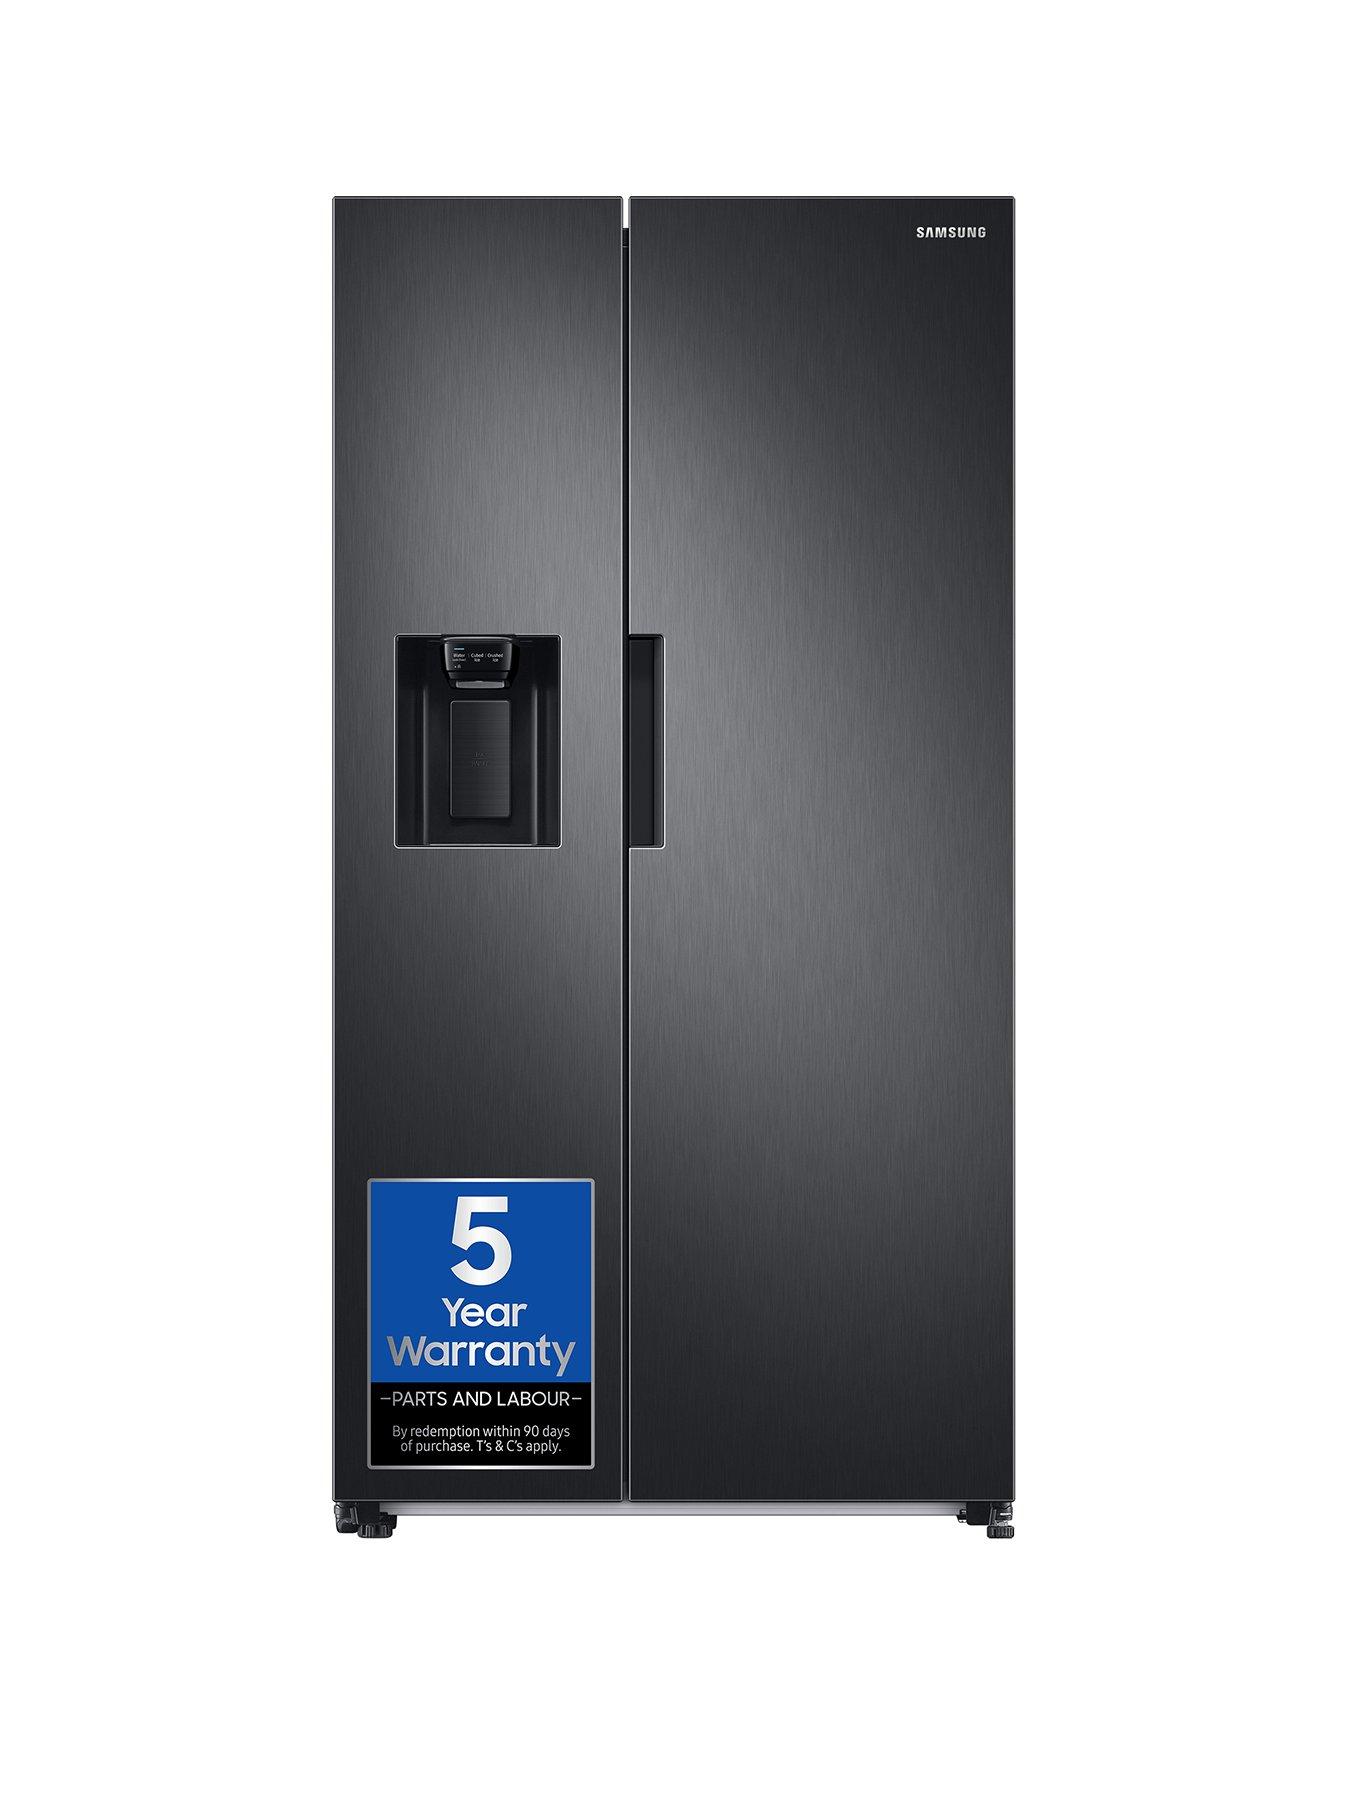 Samsung Series 7 Rs67A8811B1/Eu American Style Fridge Freezer With Spacemax Technology - Black